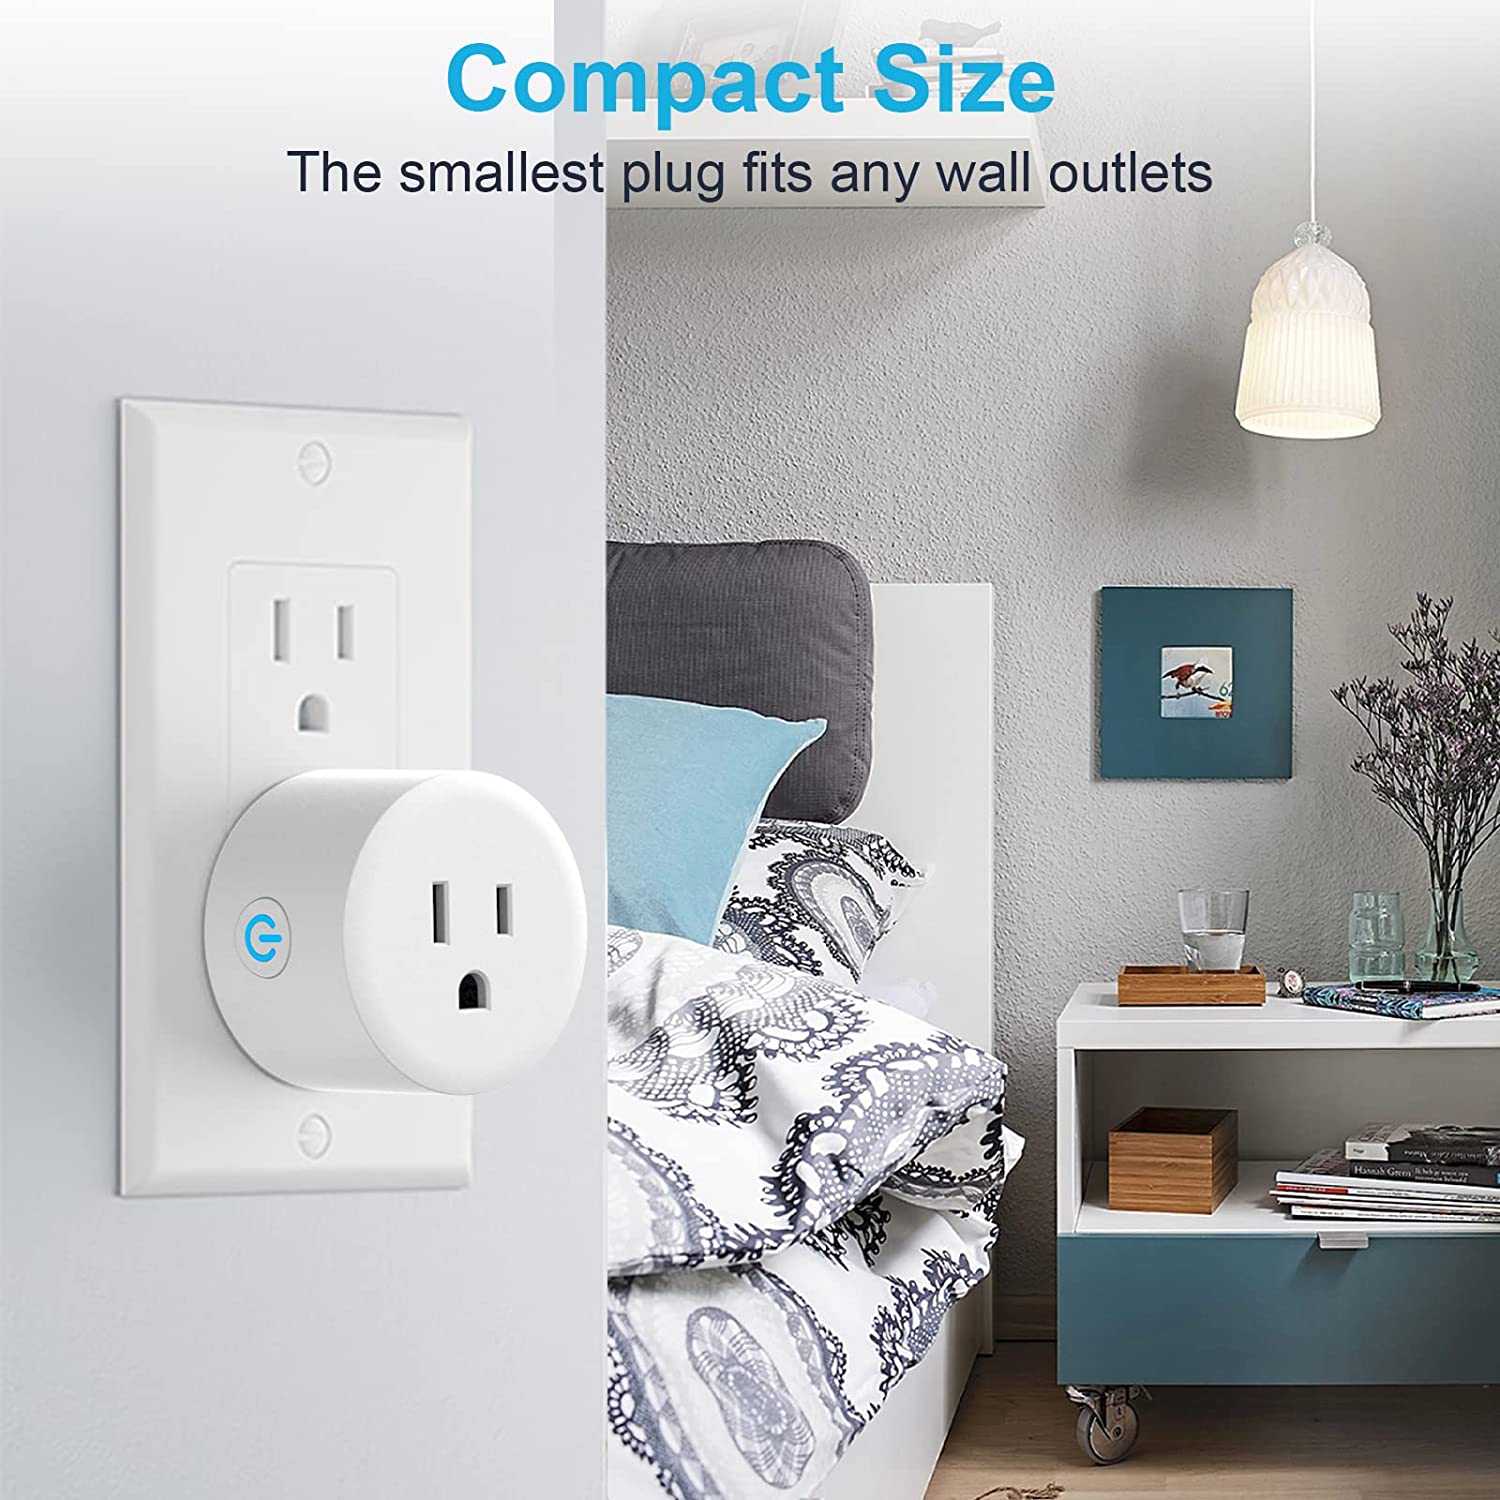  Smart Plugs That Work with Alexa, Smart Life Wi-Fi Outlet